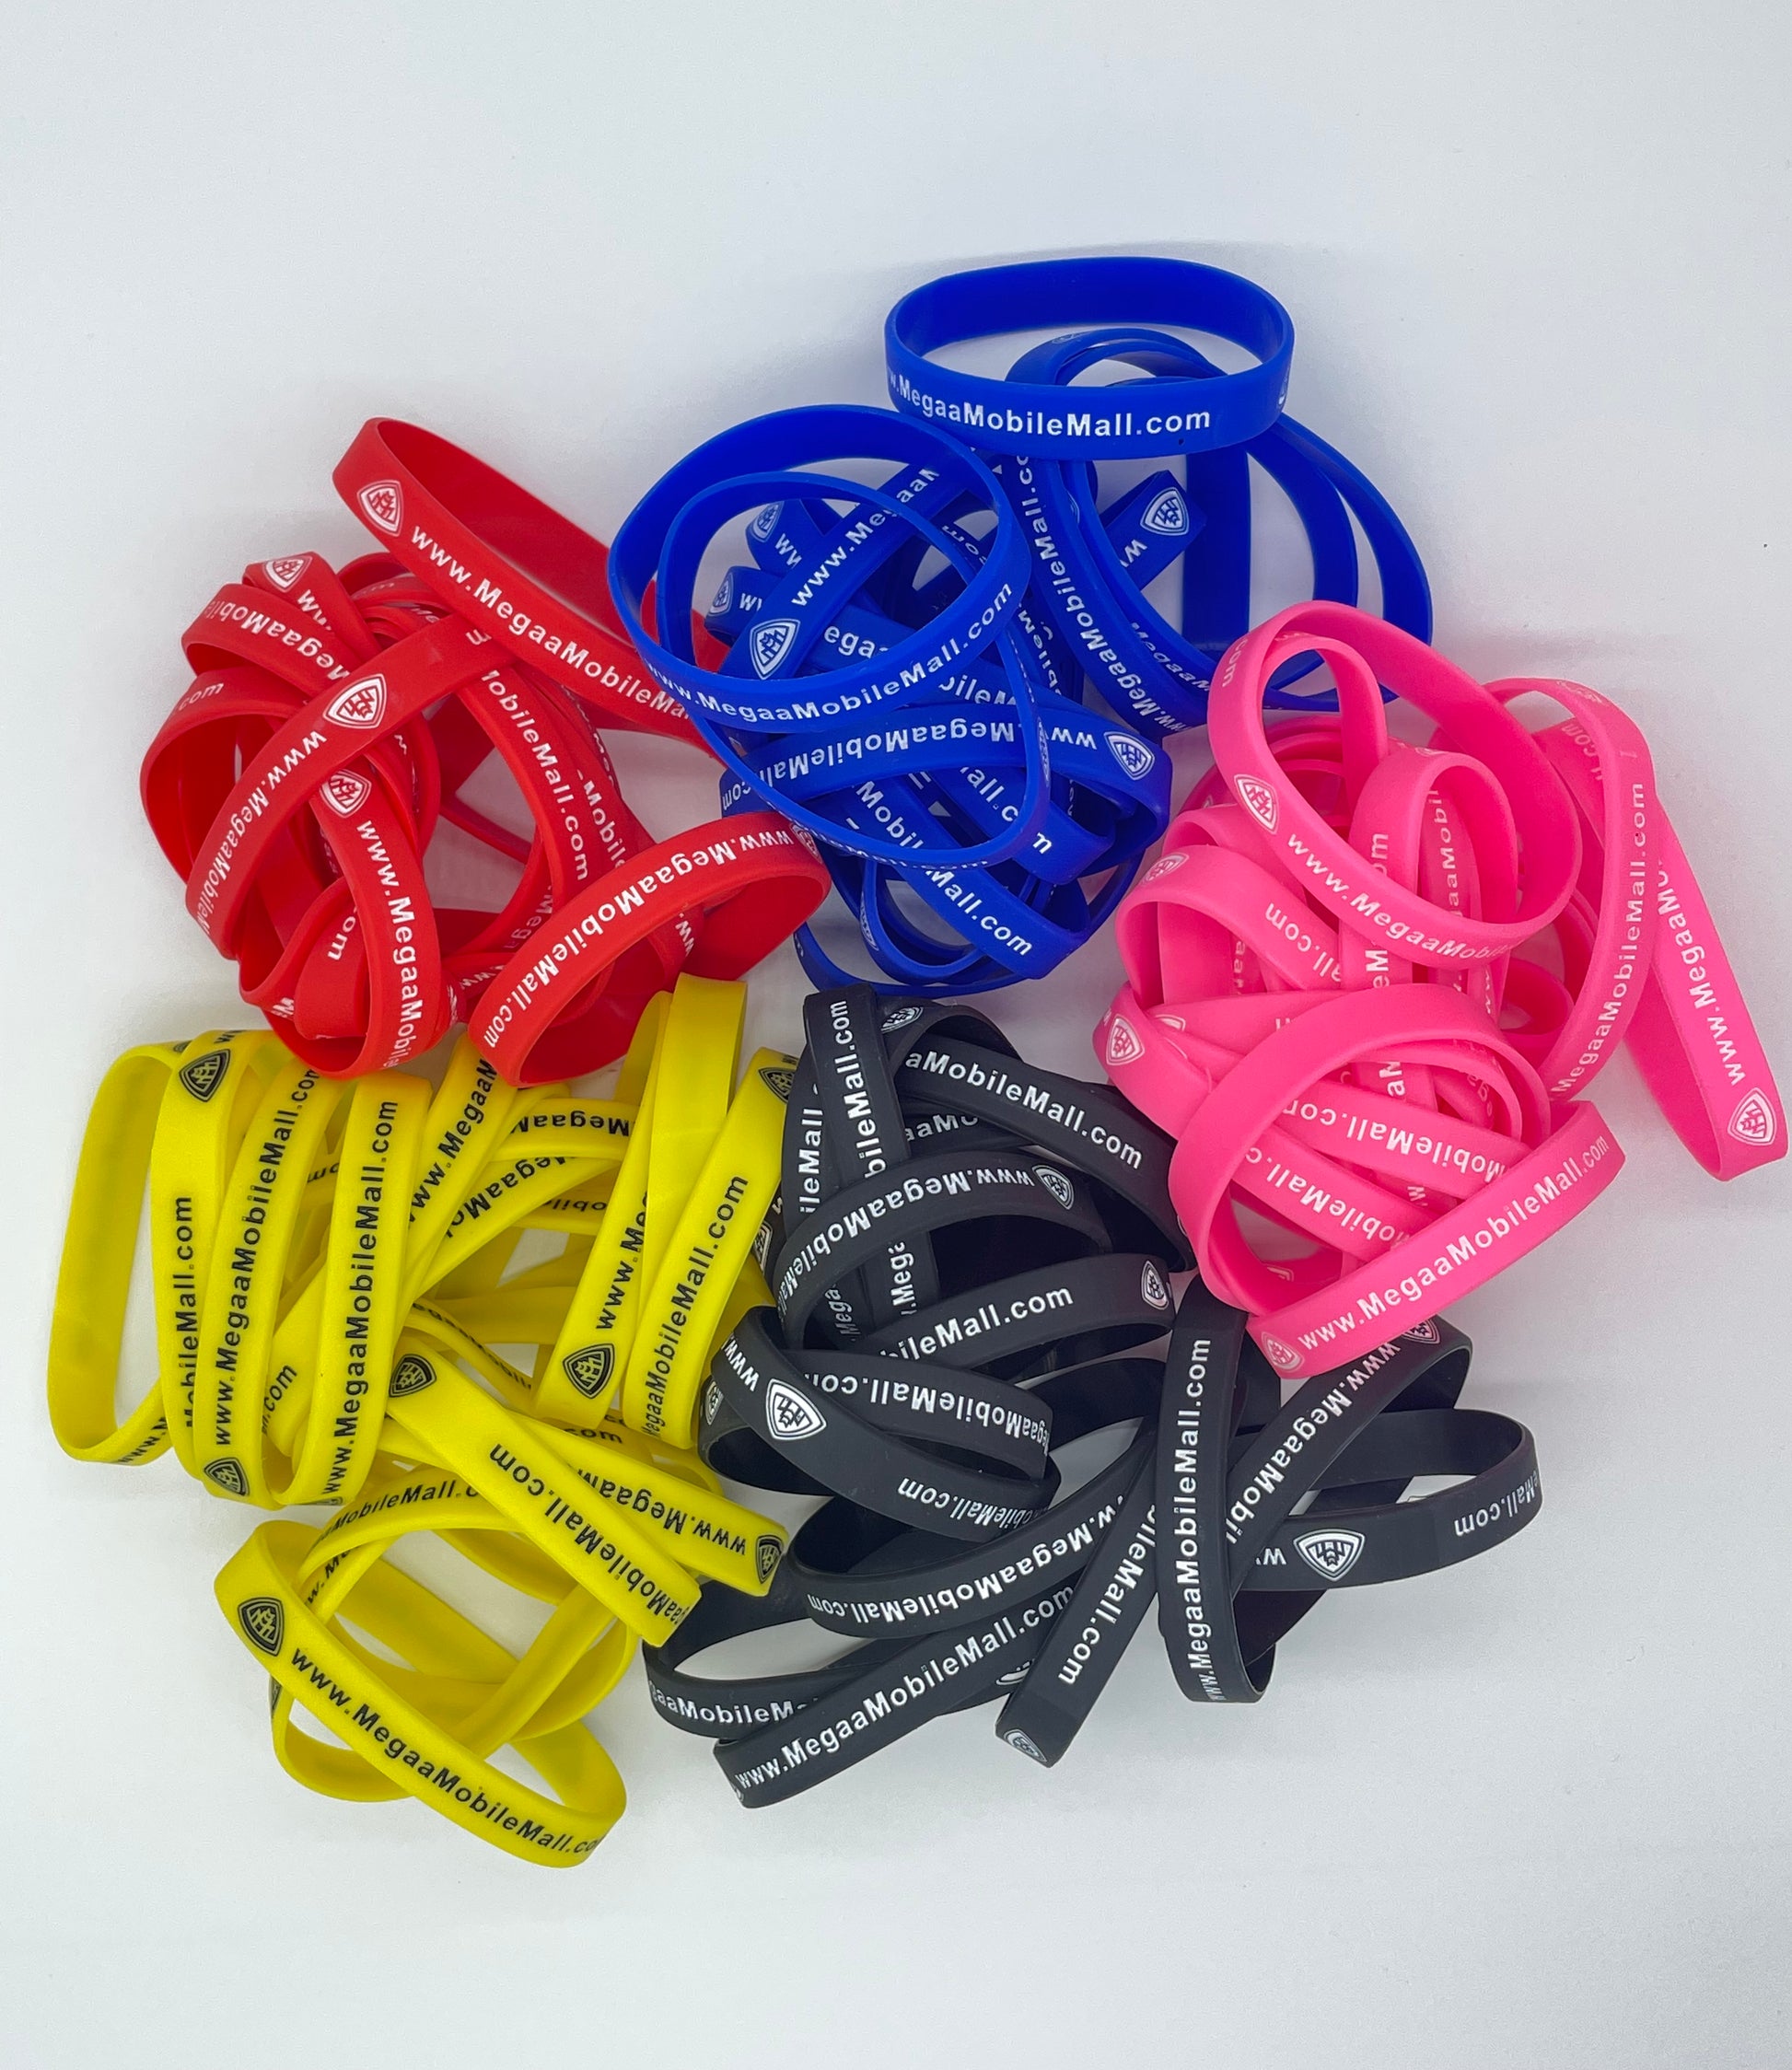 megaamobilemall wrist bands available in blue, yellow, red, black & pink